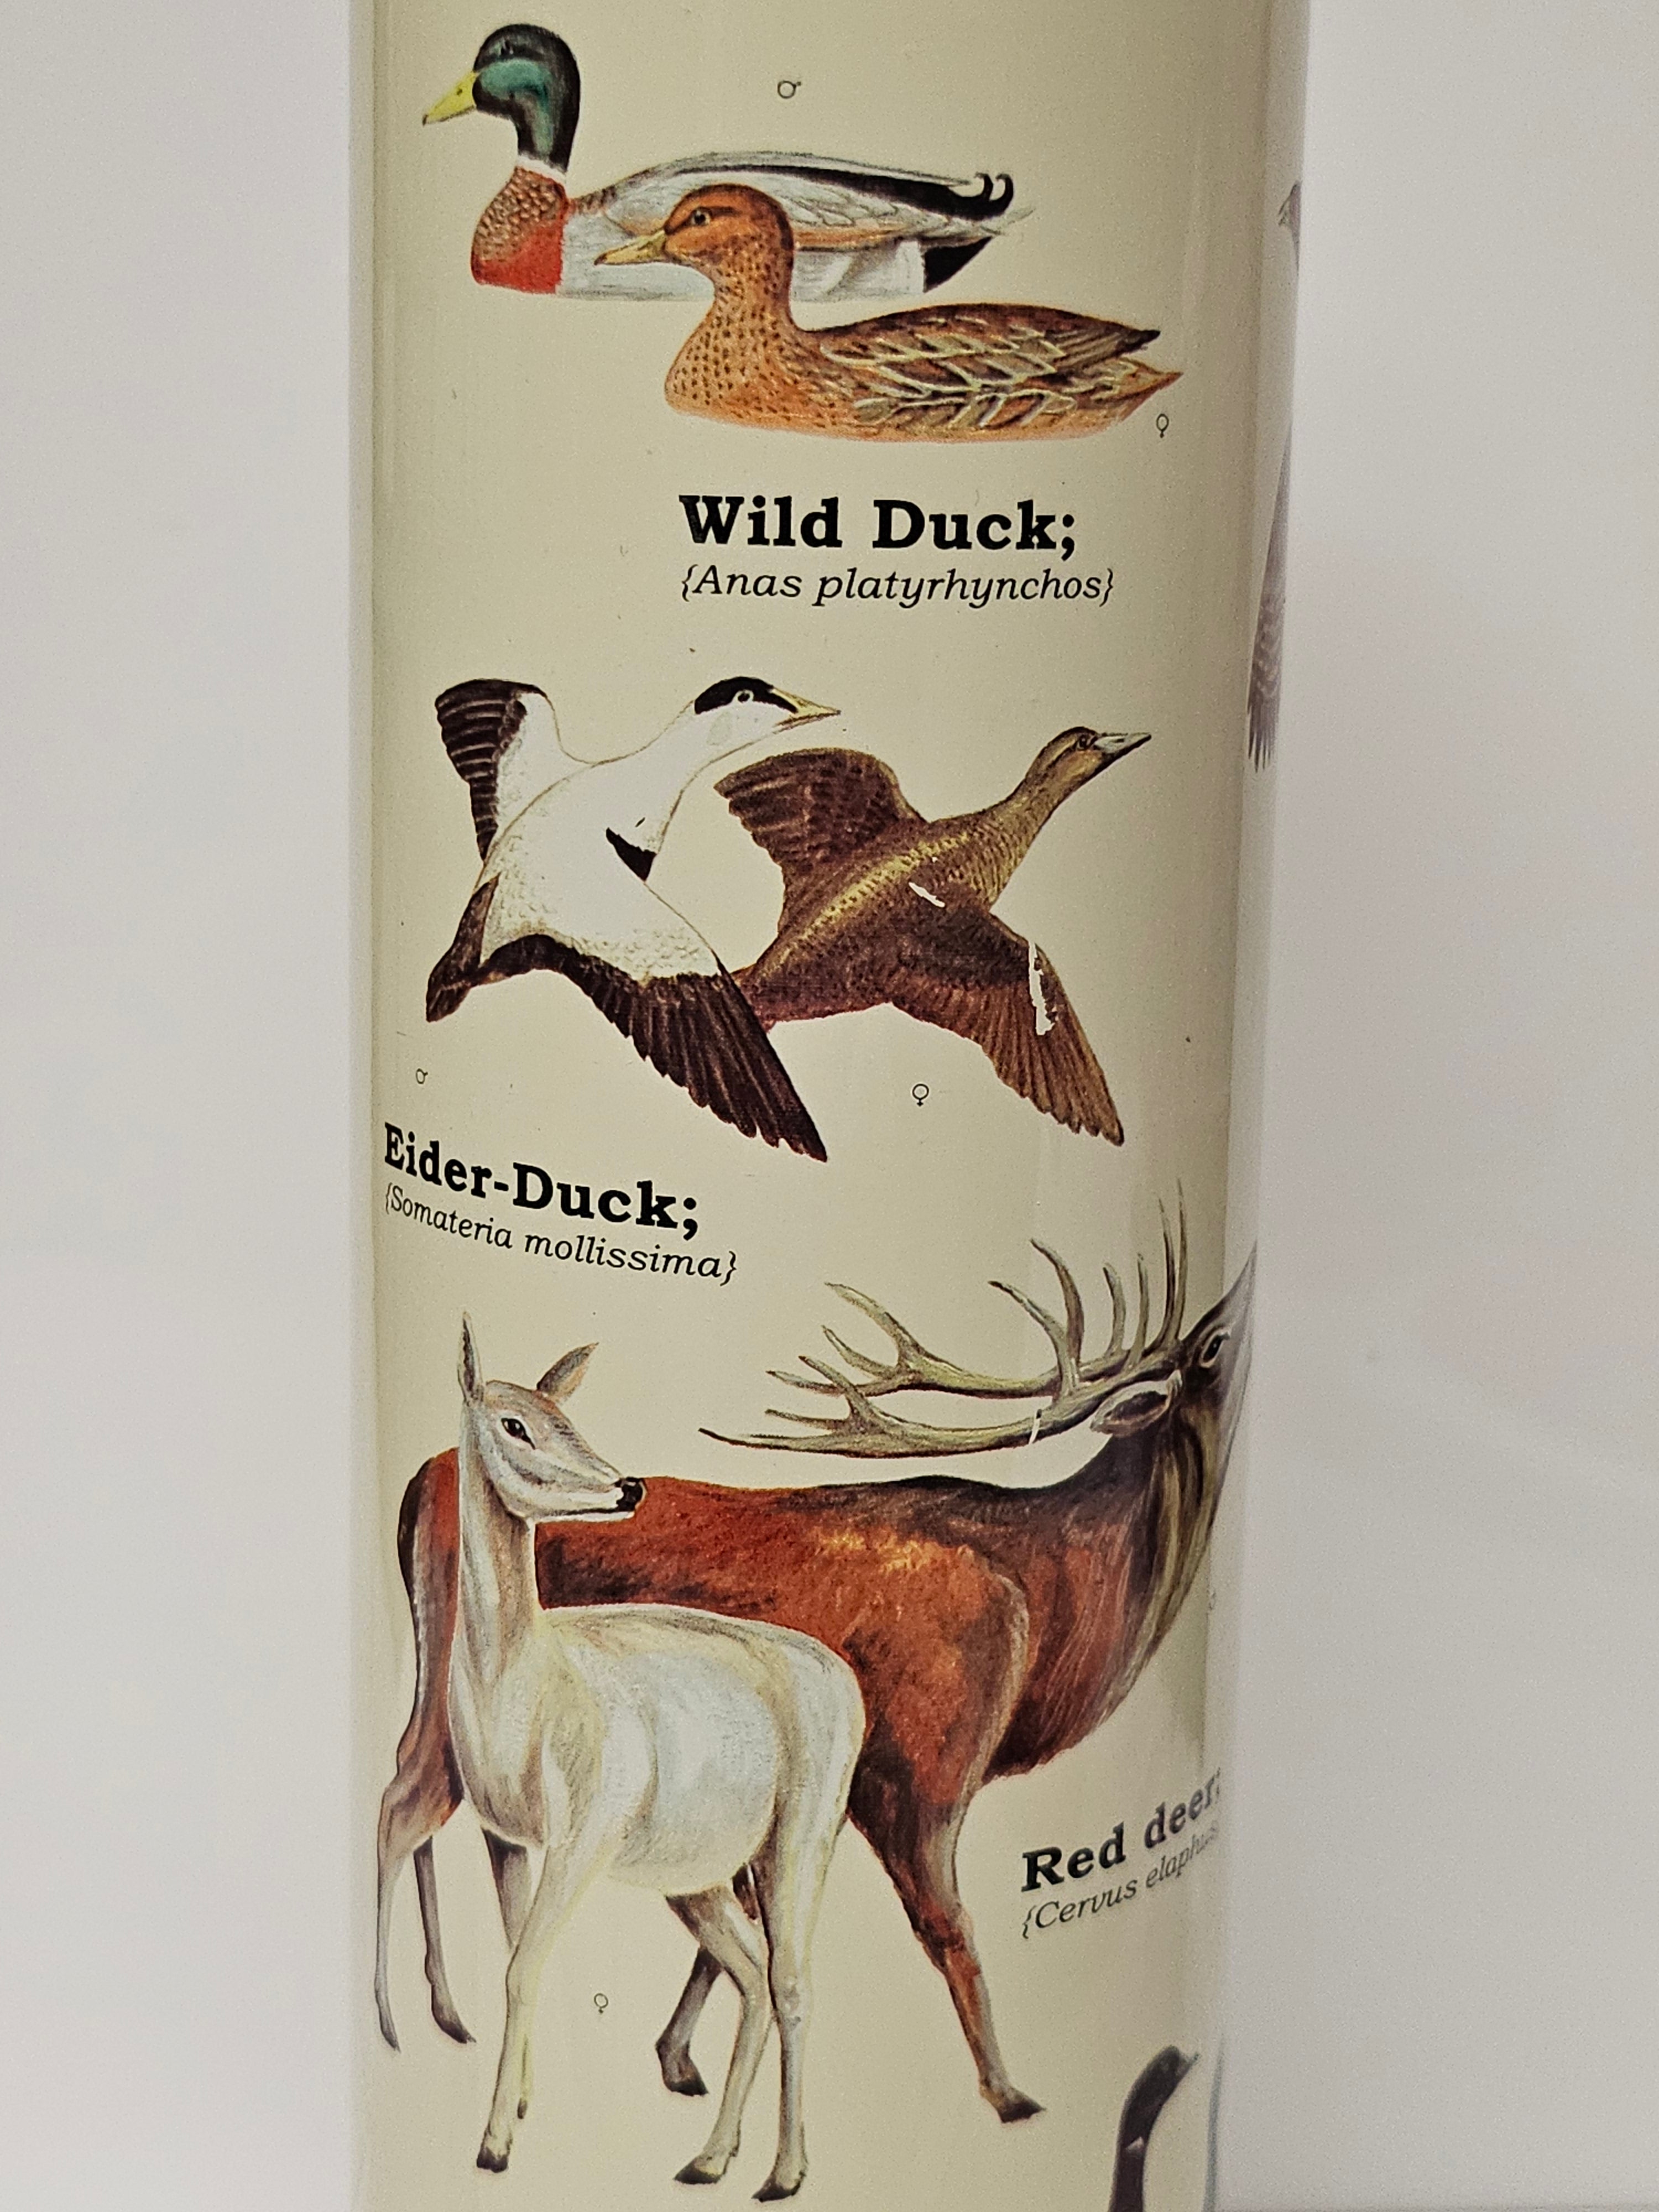 Stainless Steel Thermos - Wild Life - GR270074